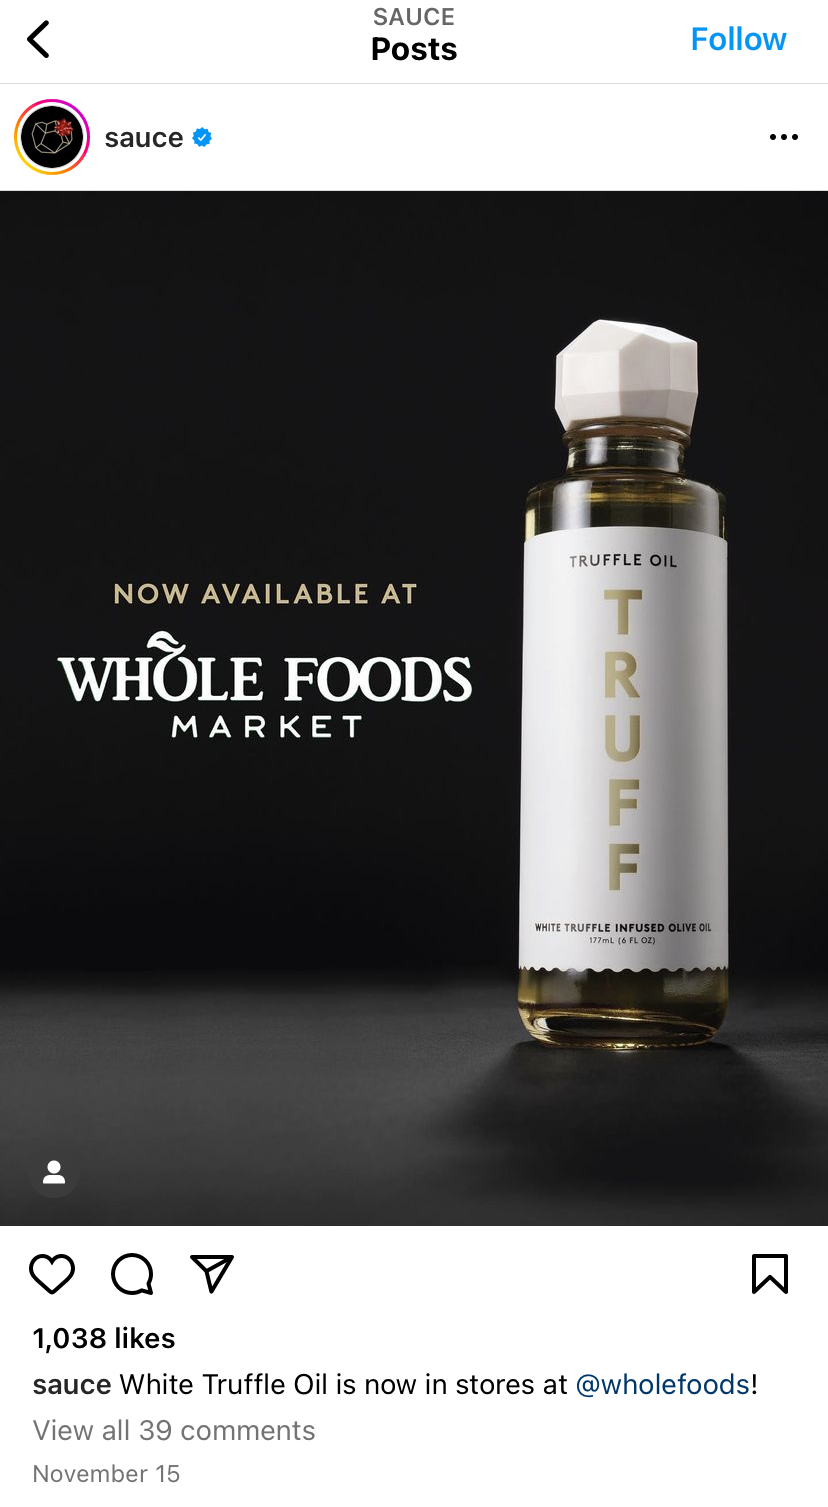 Instagram post from TRUFF announces their truffle oil is available at Whole Foods.